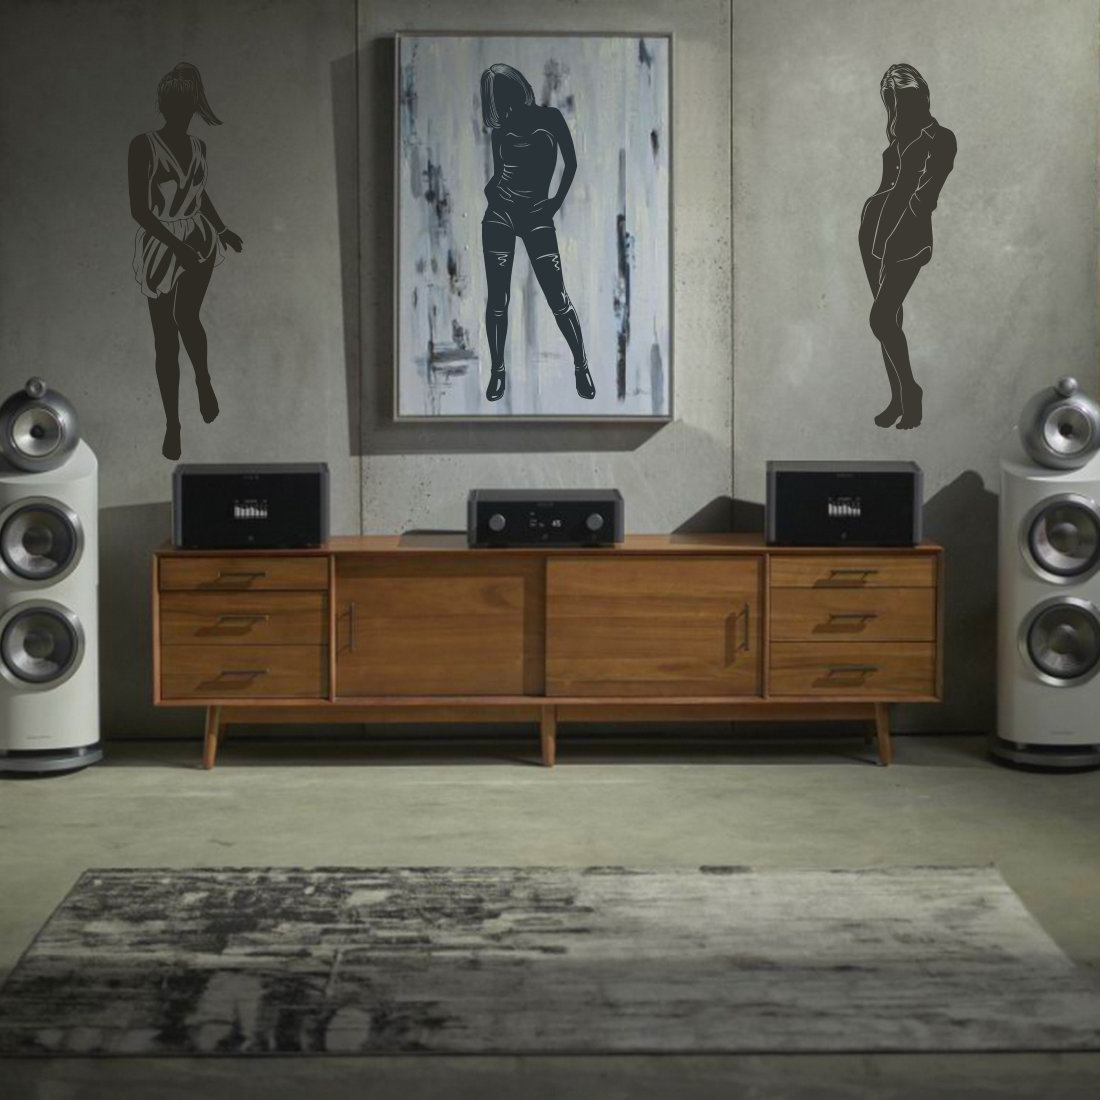 Living room with speakers and a painting on the wall.